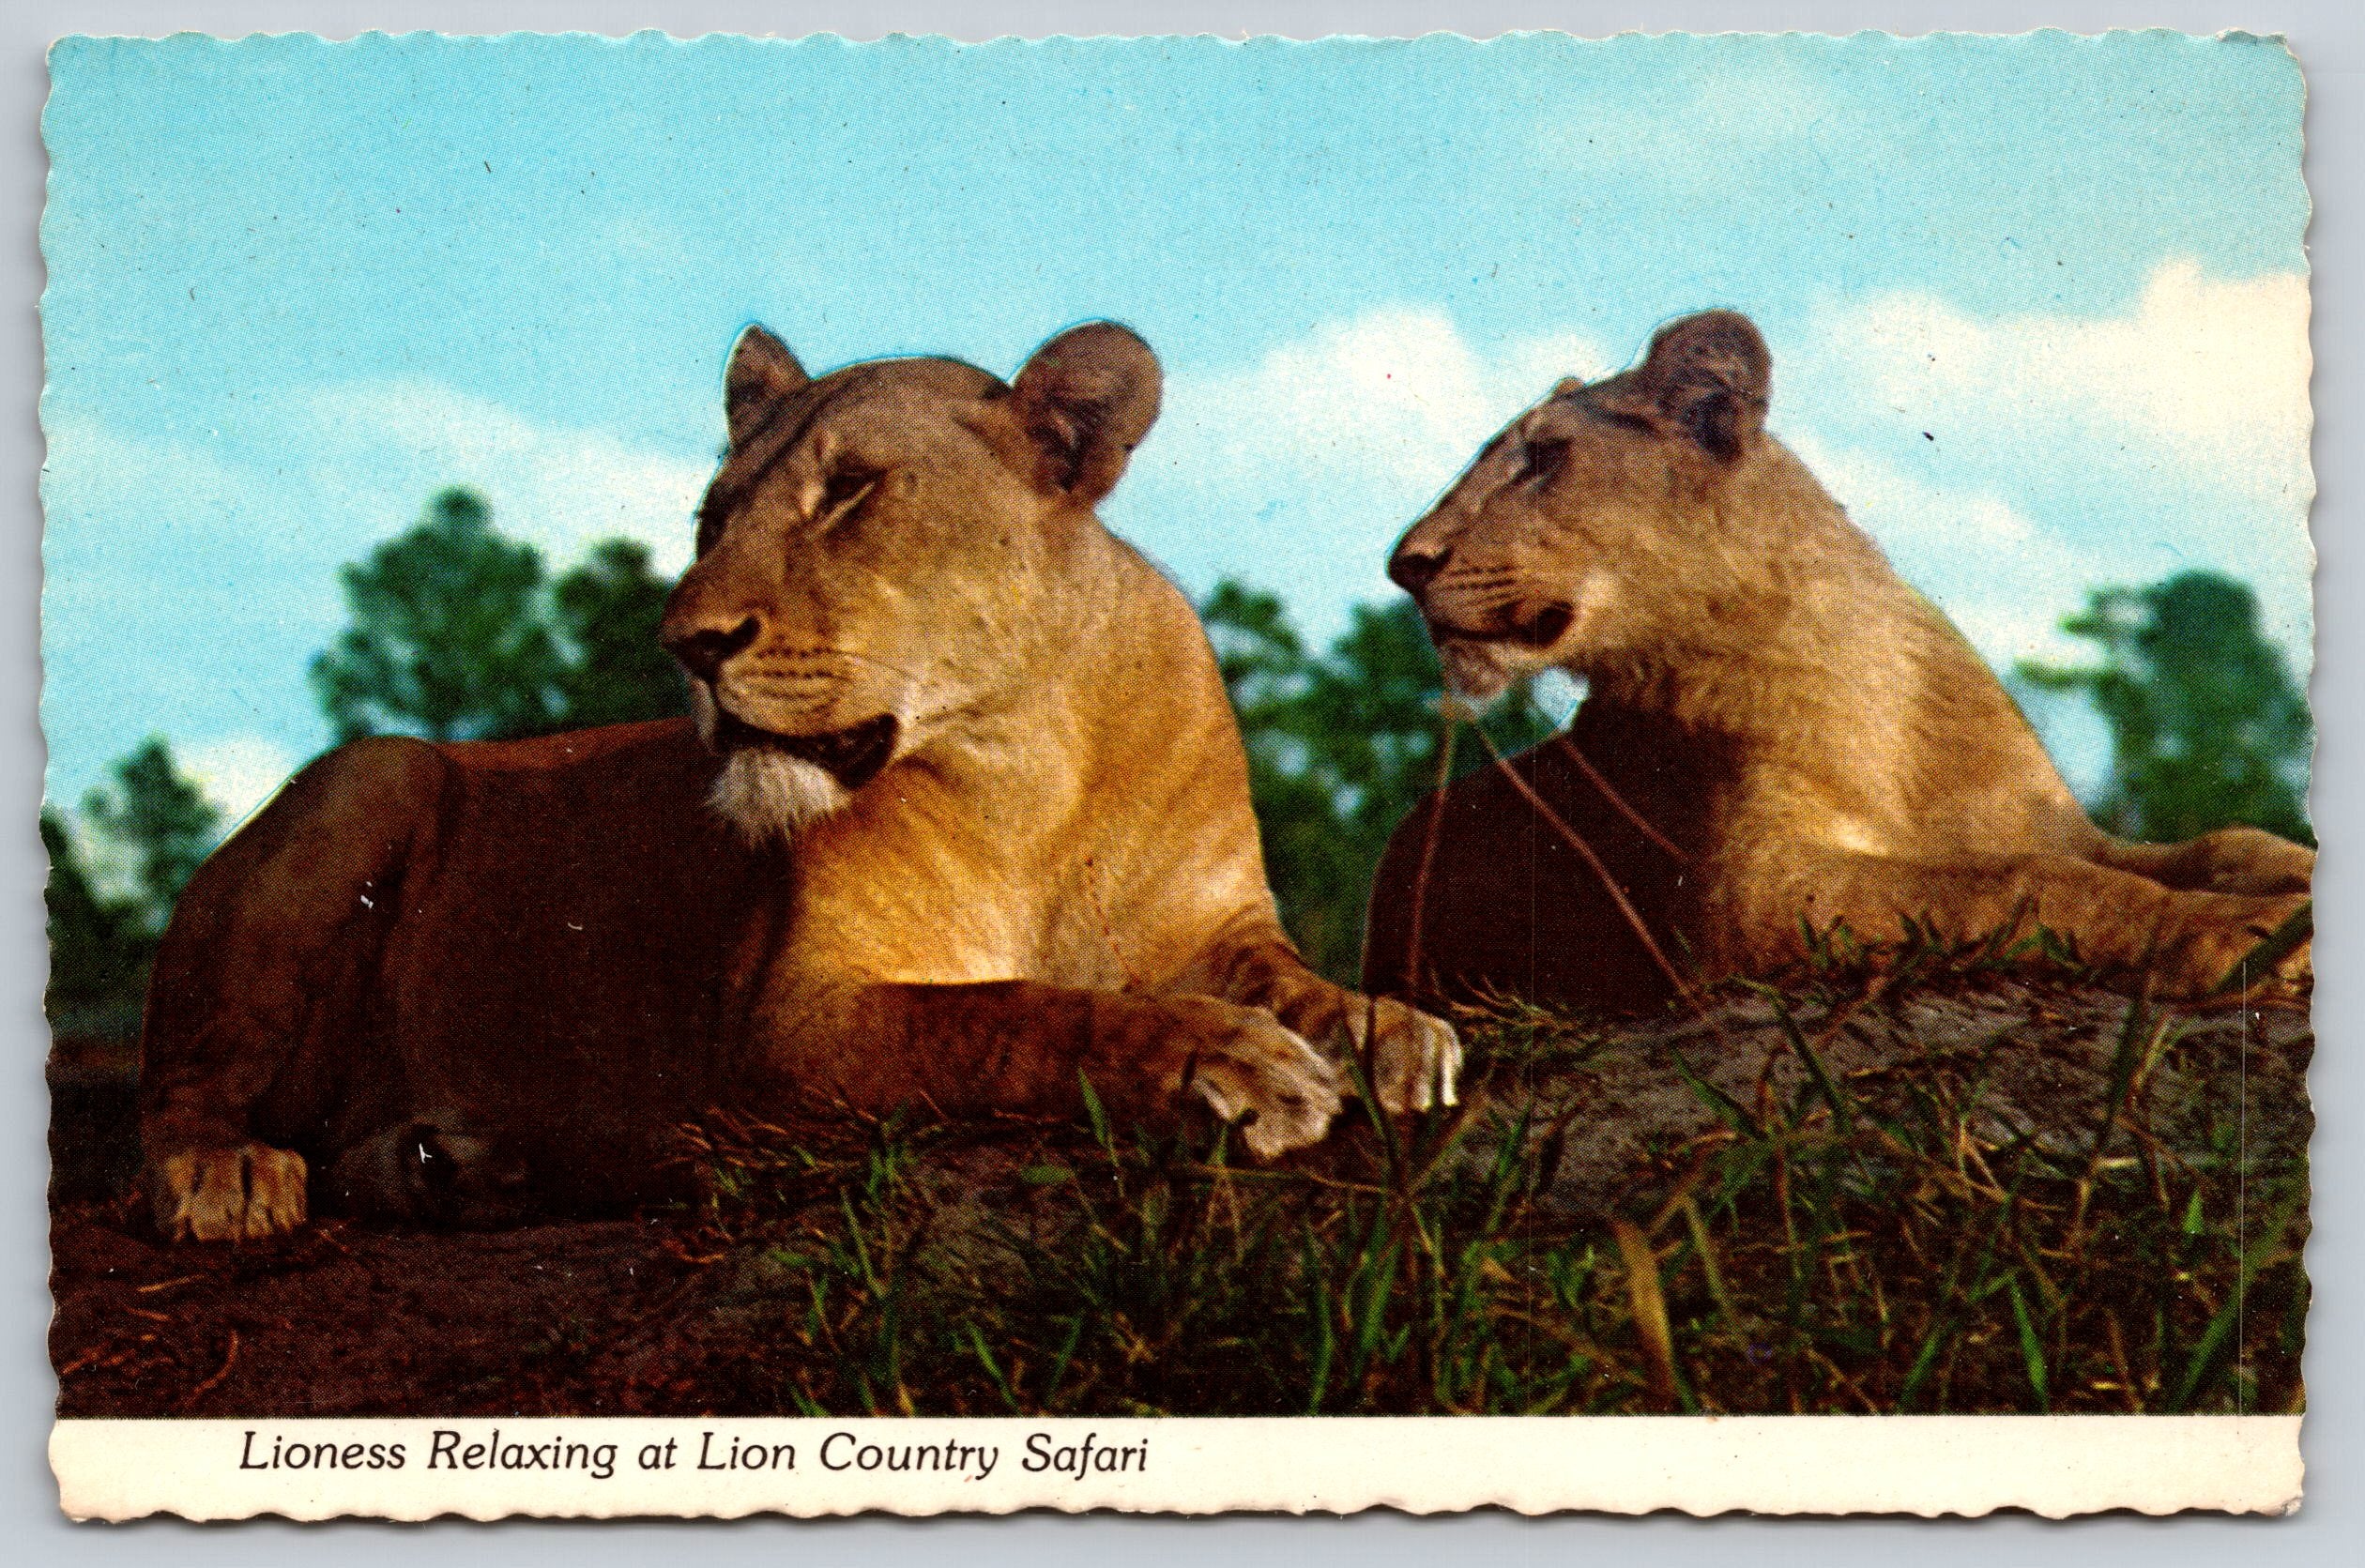 Lioness Relaxing, Lion County Safari, Vintage Post Card